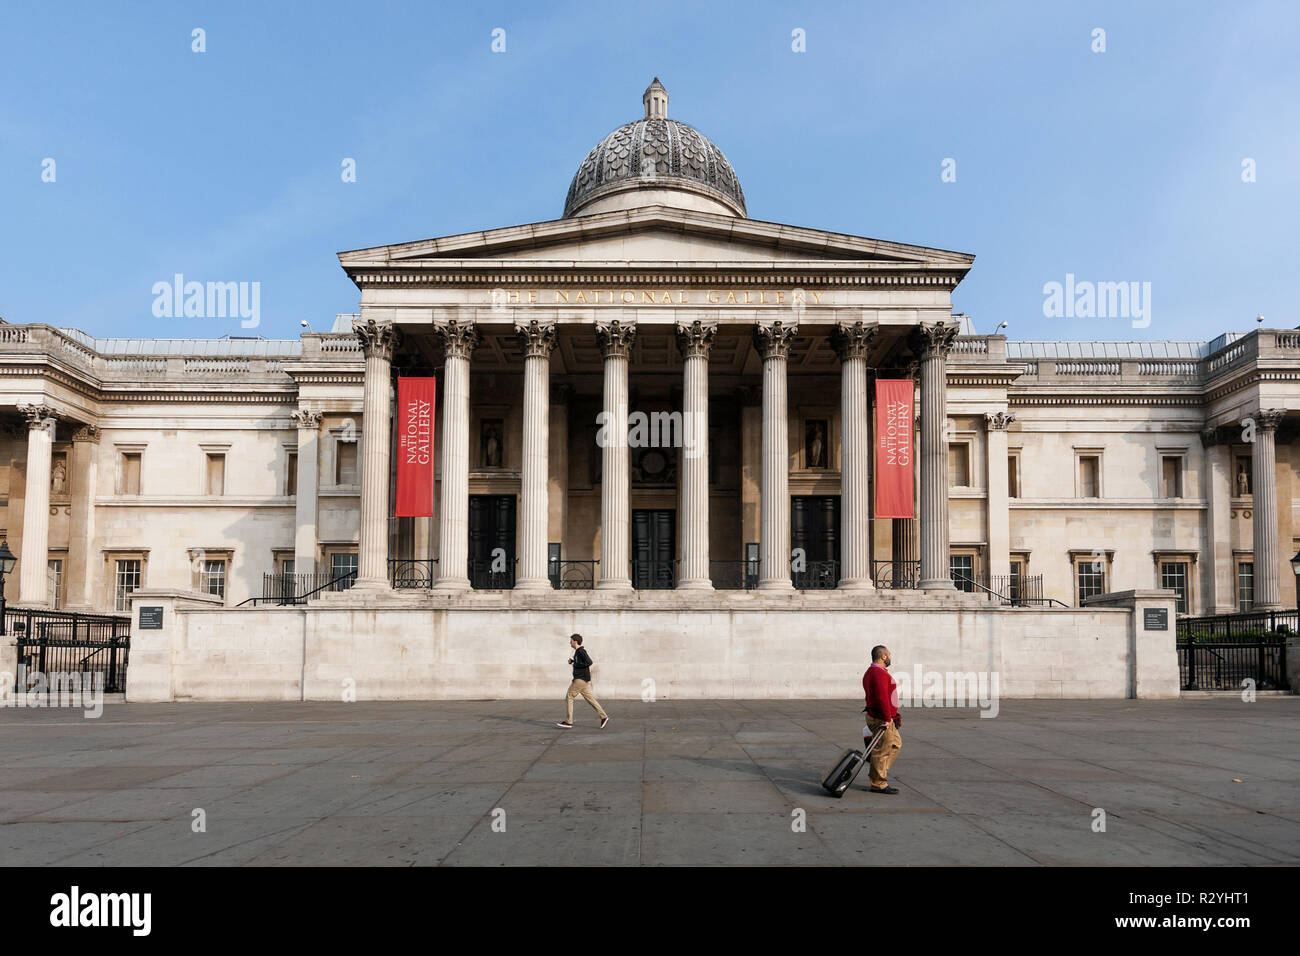 The National Gallery neoclassical building by William Wilkins, City of Westminster, London, the facade of the museum on Trafalgar Square, exterior Stock Photo